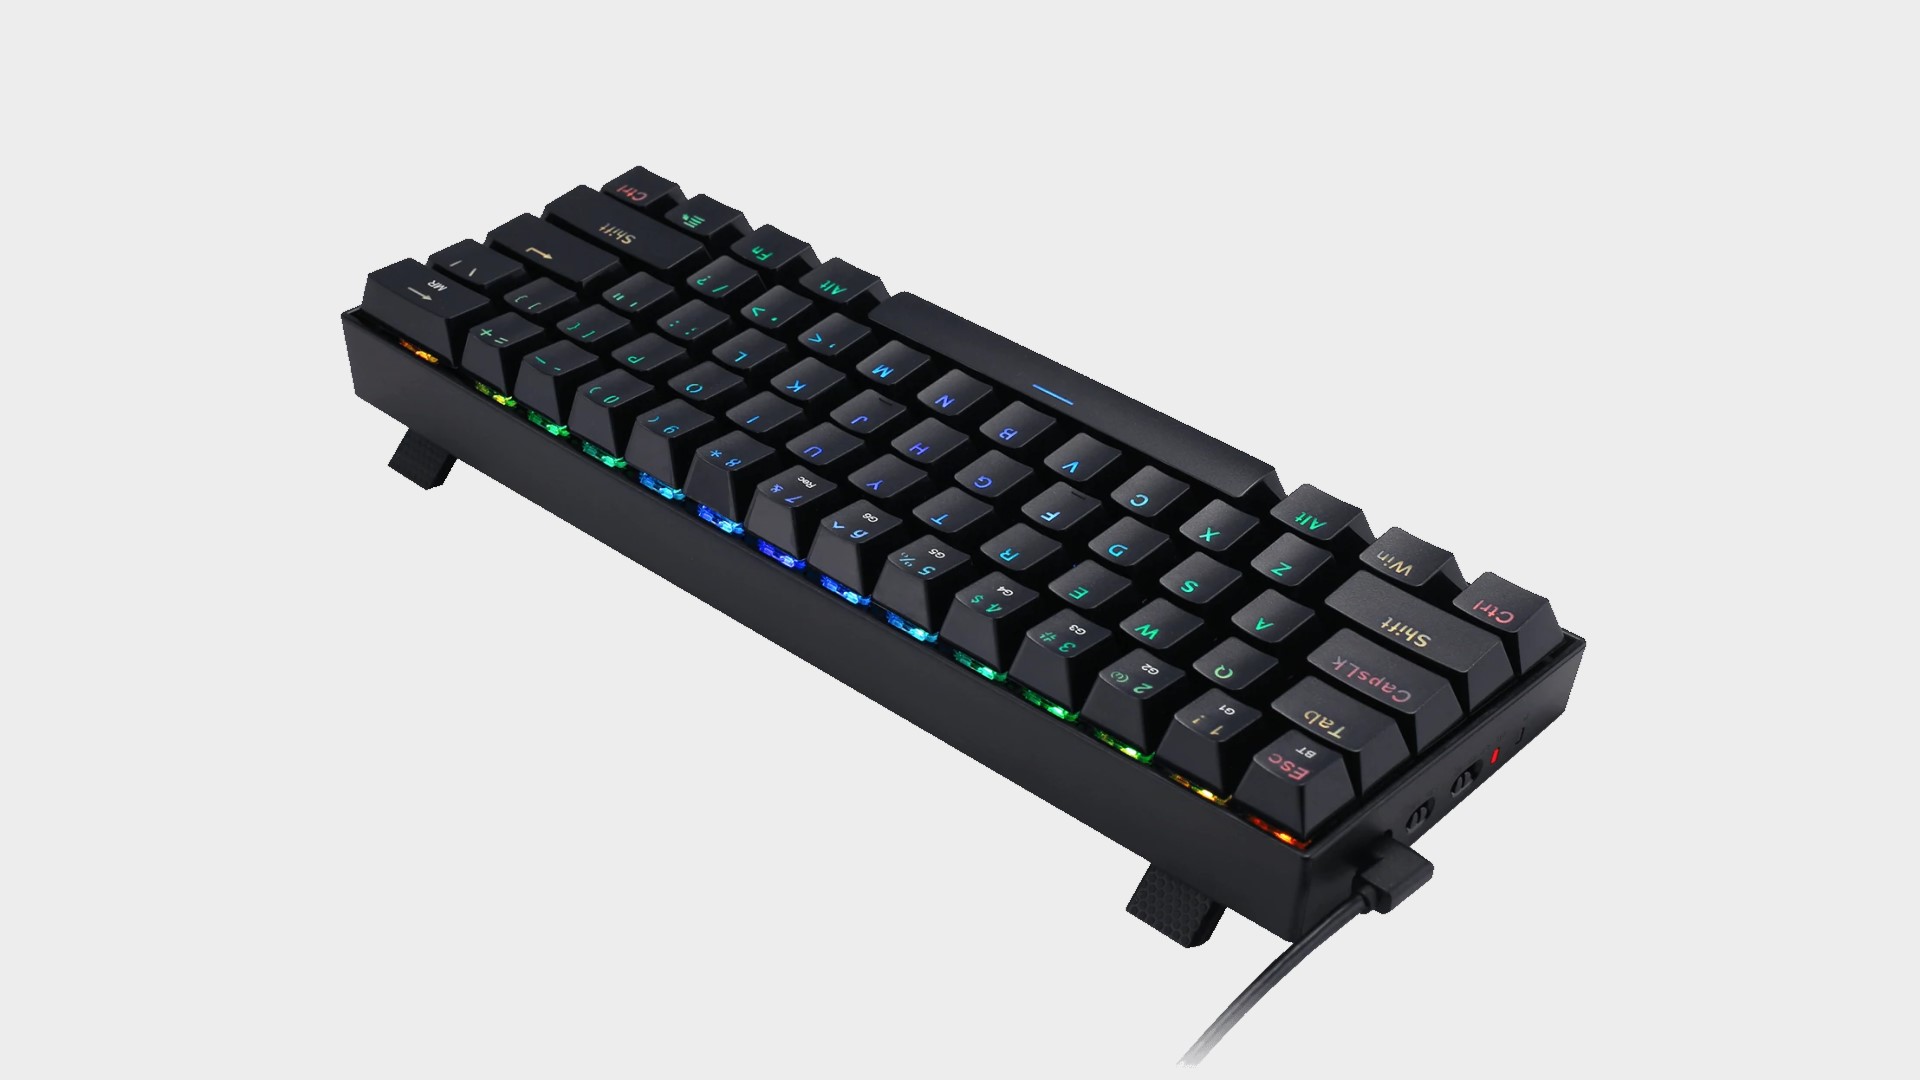 Redragon K530 hot-swappable keyboard